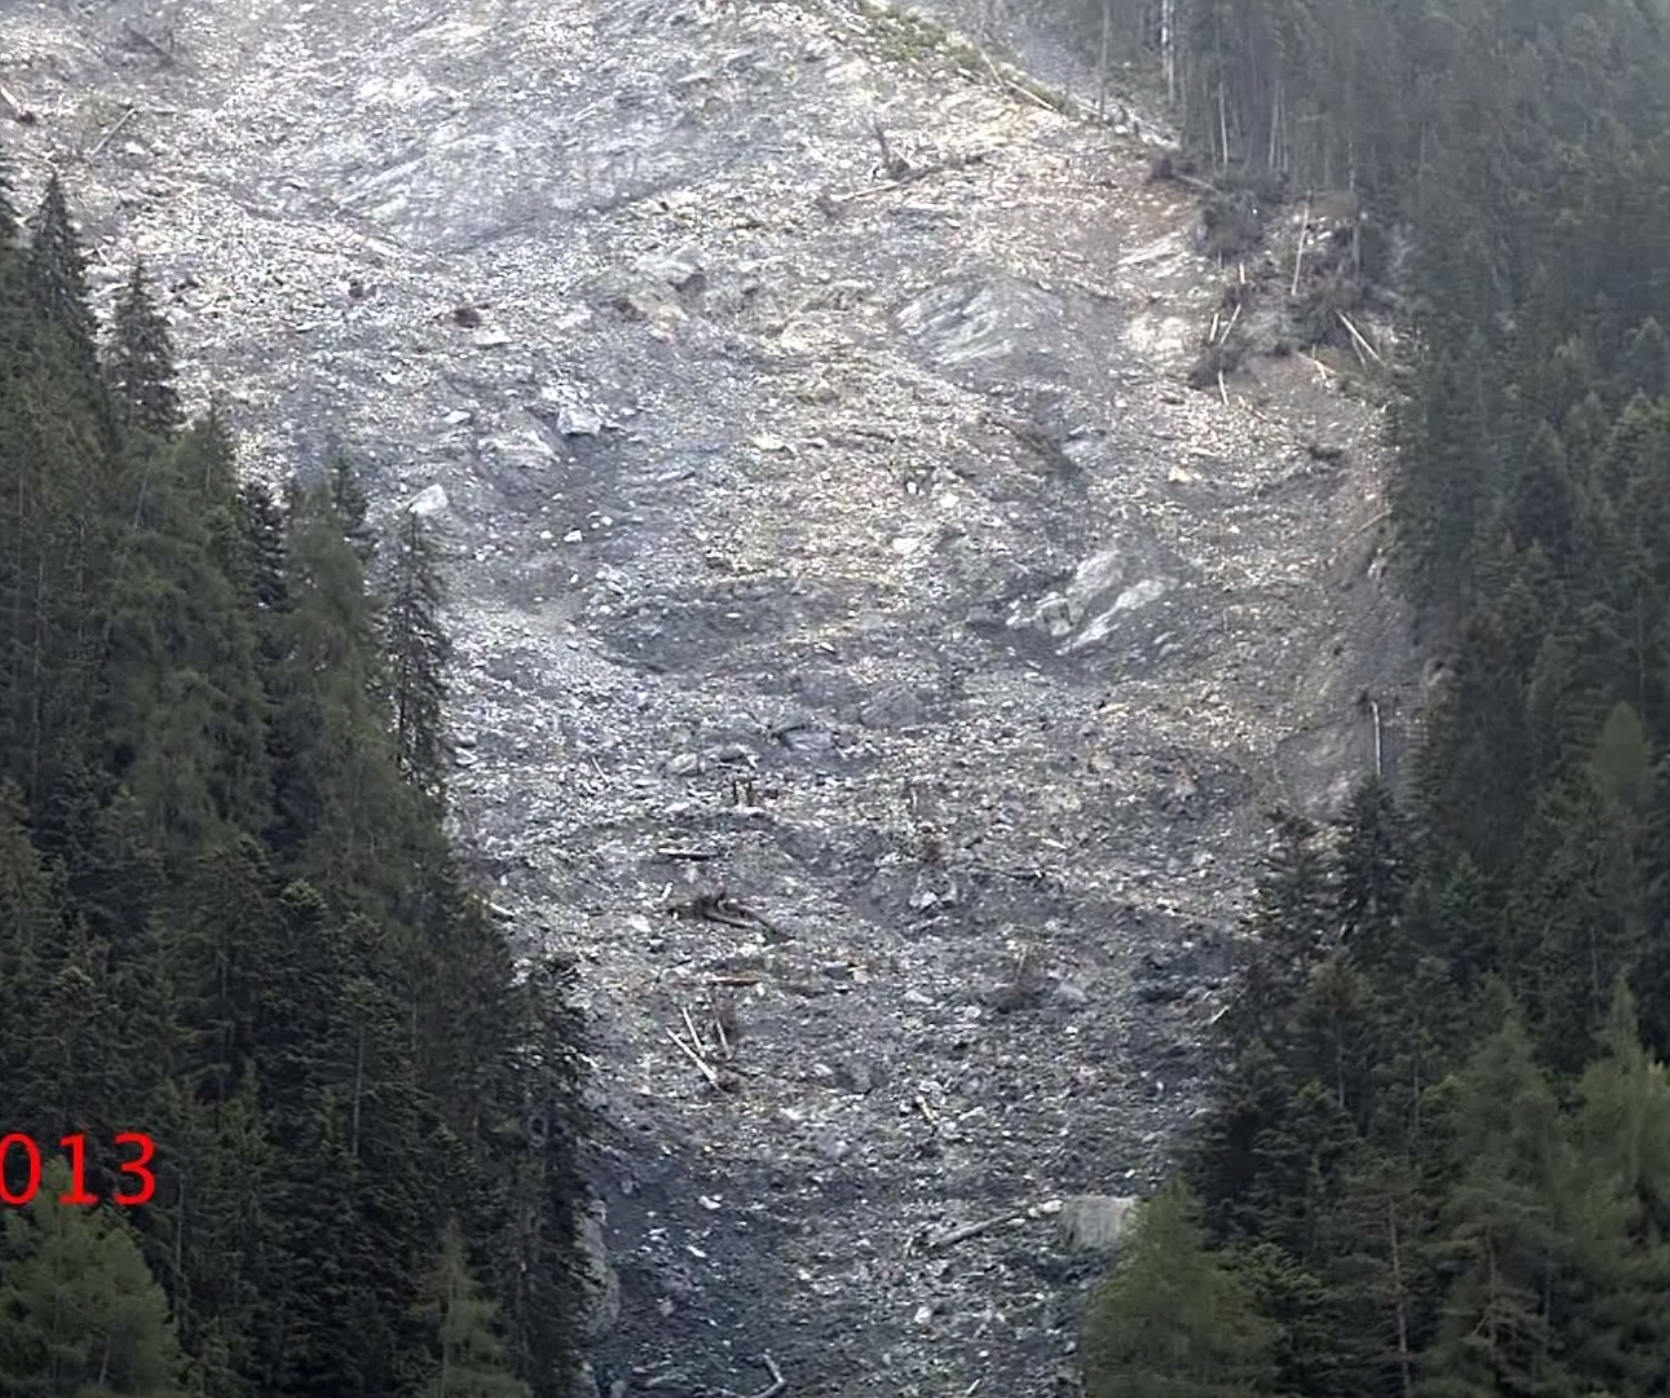 Watch A Timelapse Of A Slow-Moving Landslide [Video]